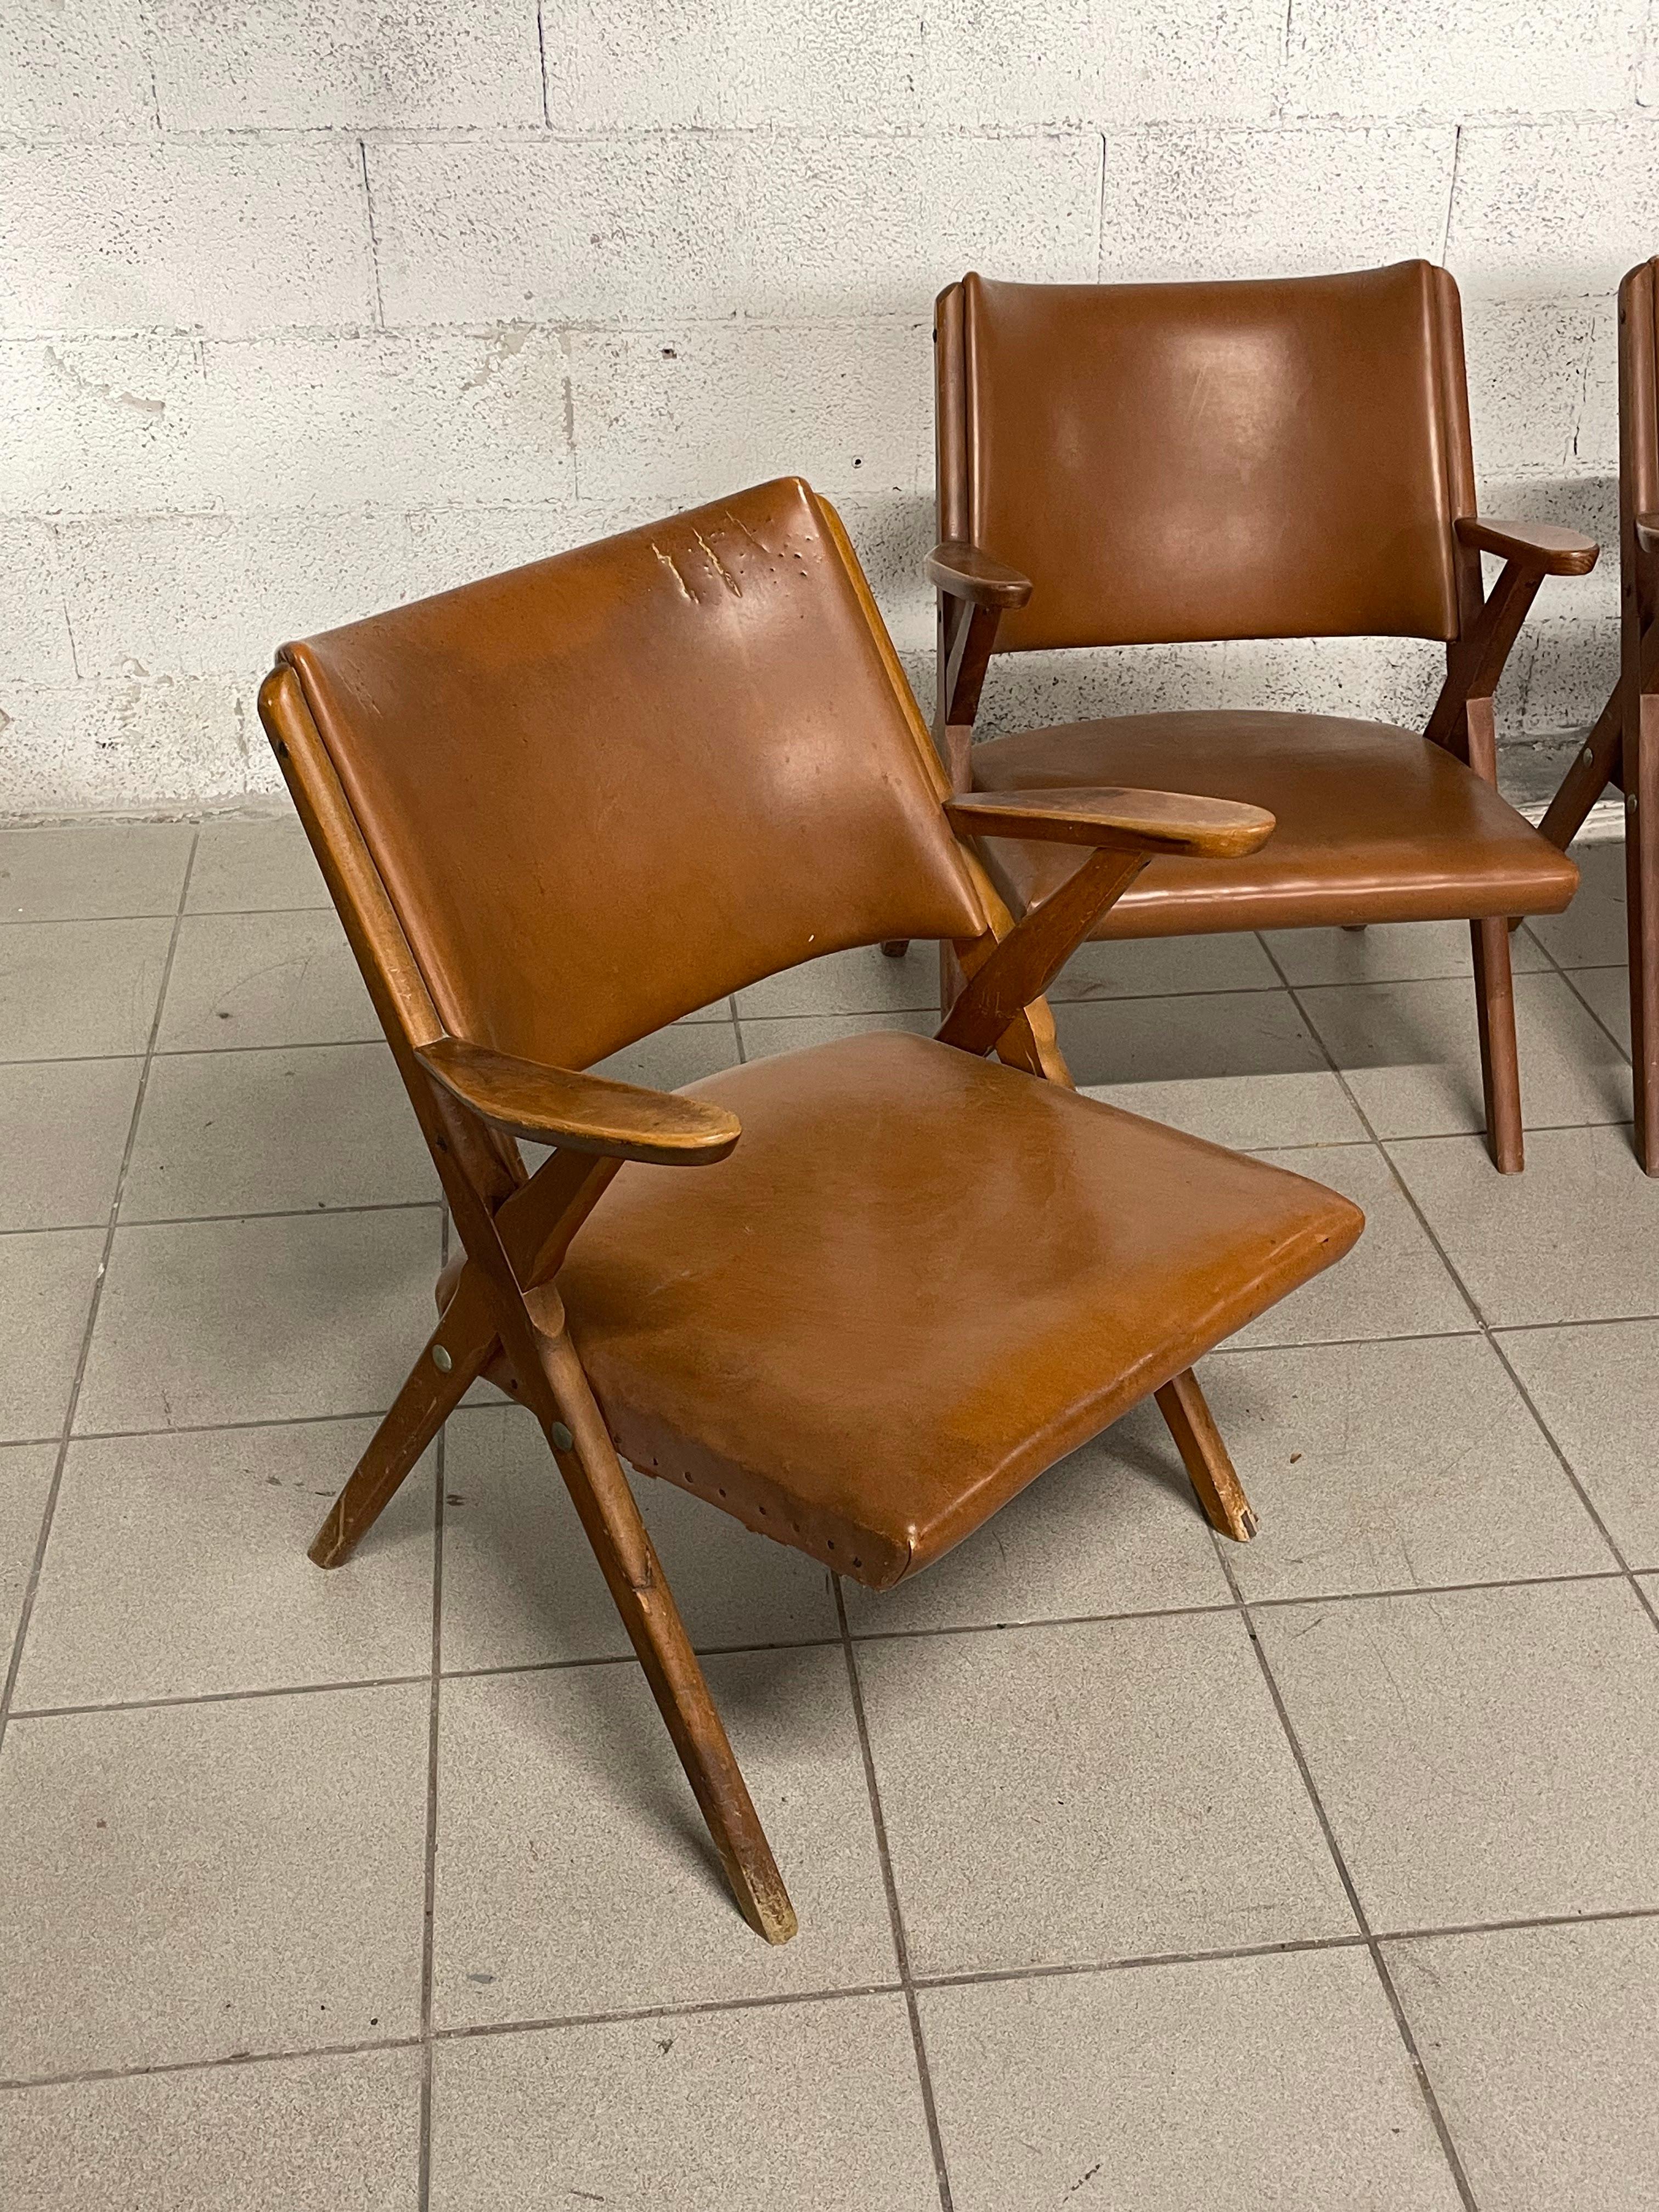 Set of 4 Scandinavian-designed 1960s armchairs produced by the historic DAL VERA furniture factory in Conegliano Veneto, Italy, and designed by Antonio Dal Vera himself.

They are made of solid wood and with brown faux leather upholstery. La